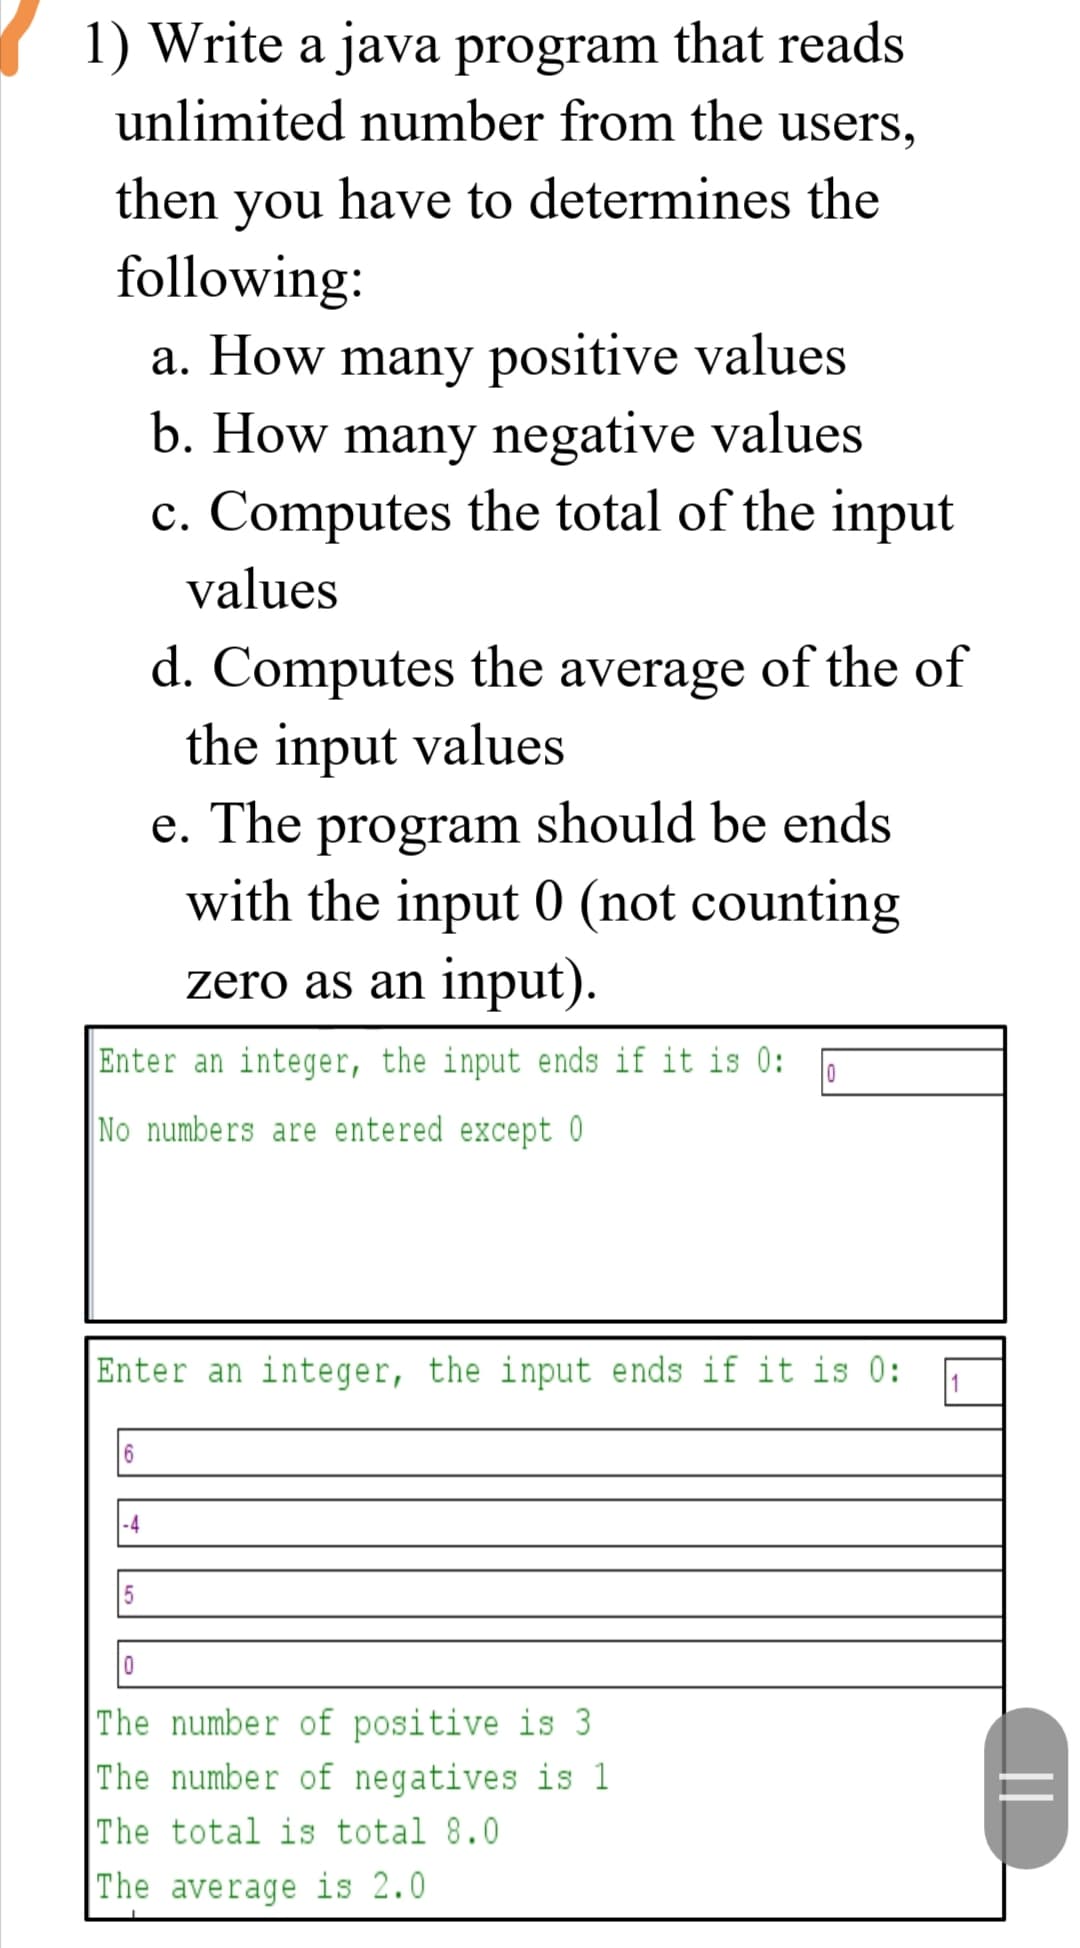 1) Write a java program that reads
unlimited number from the users,
then you have to determines the
following:
a. How many positive values
b. How many negative values
c. Computes the total of the input
values
d. Computes the average of the of
the input values
e. The program should be ends
with the input 0 (not counting
zero as an input).
Enter an integer, the input ends if it is 0:
No numbers are entered except 0
Enter an integer, the input ends if it is 0:
1
-4
The number of positive is 3
The number of negatives is 1
The total is total 8.0
The average is 2.0
